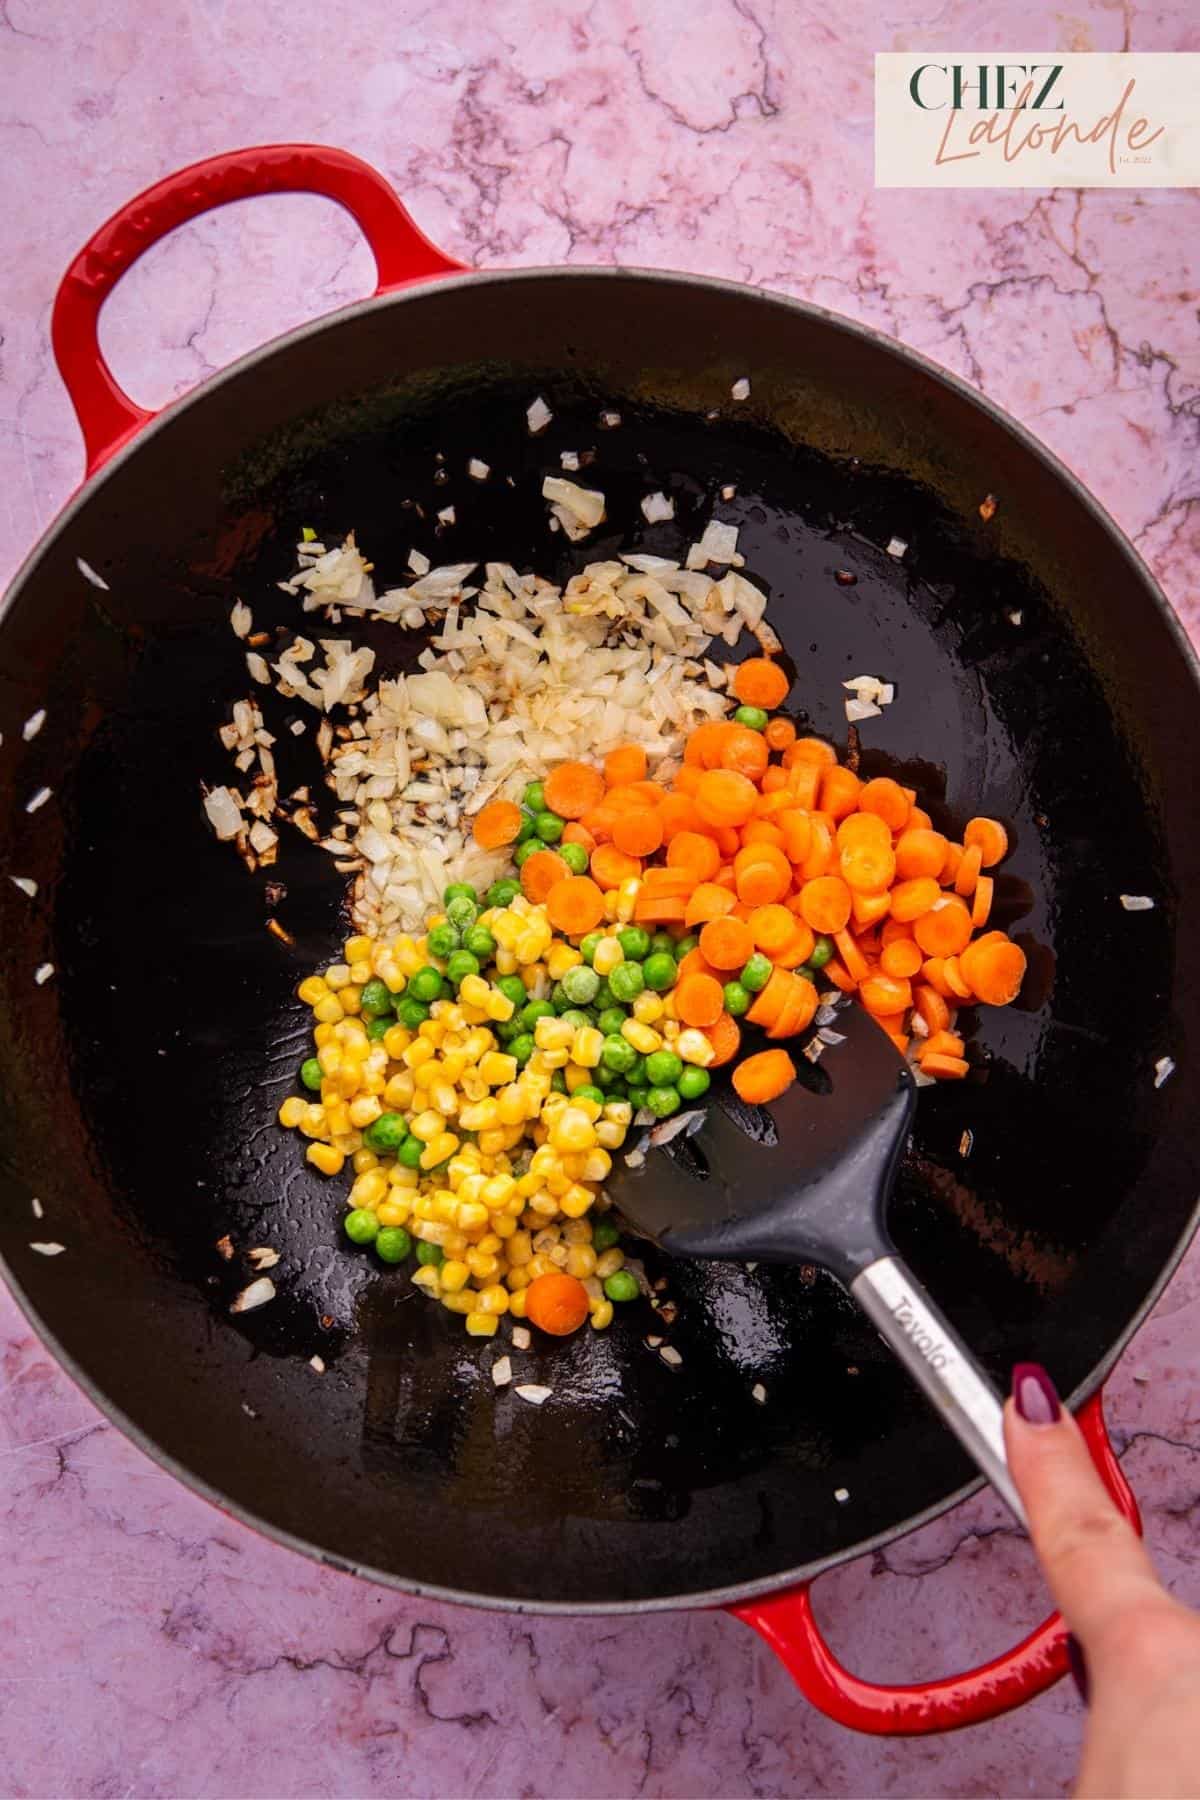 Mix in the frozen vegetables and stir-fry for another minute.